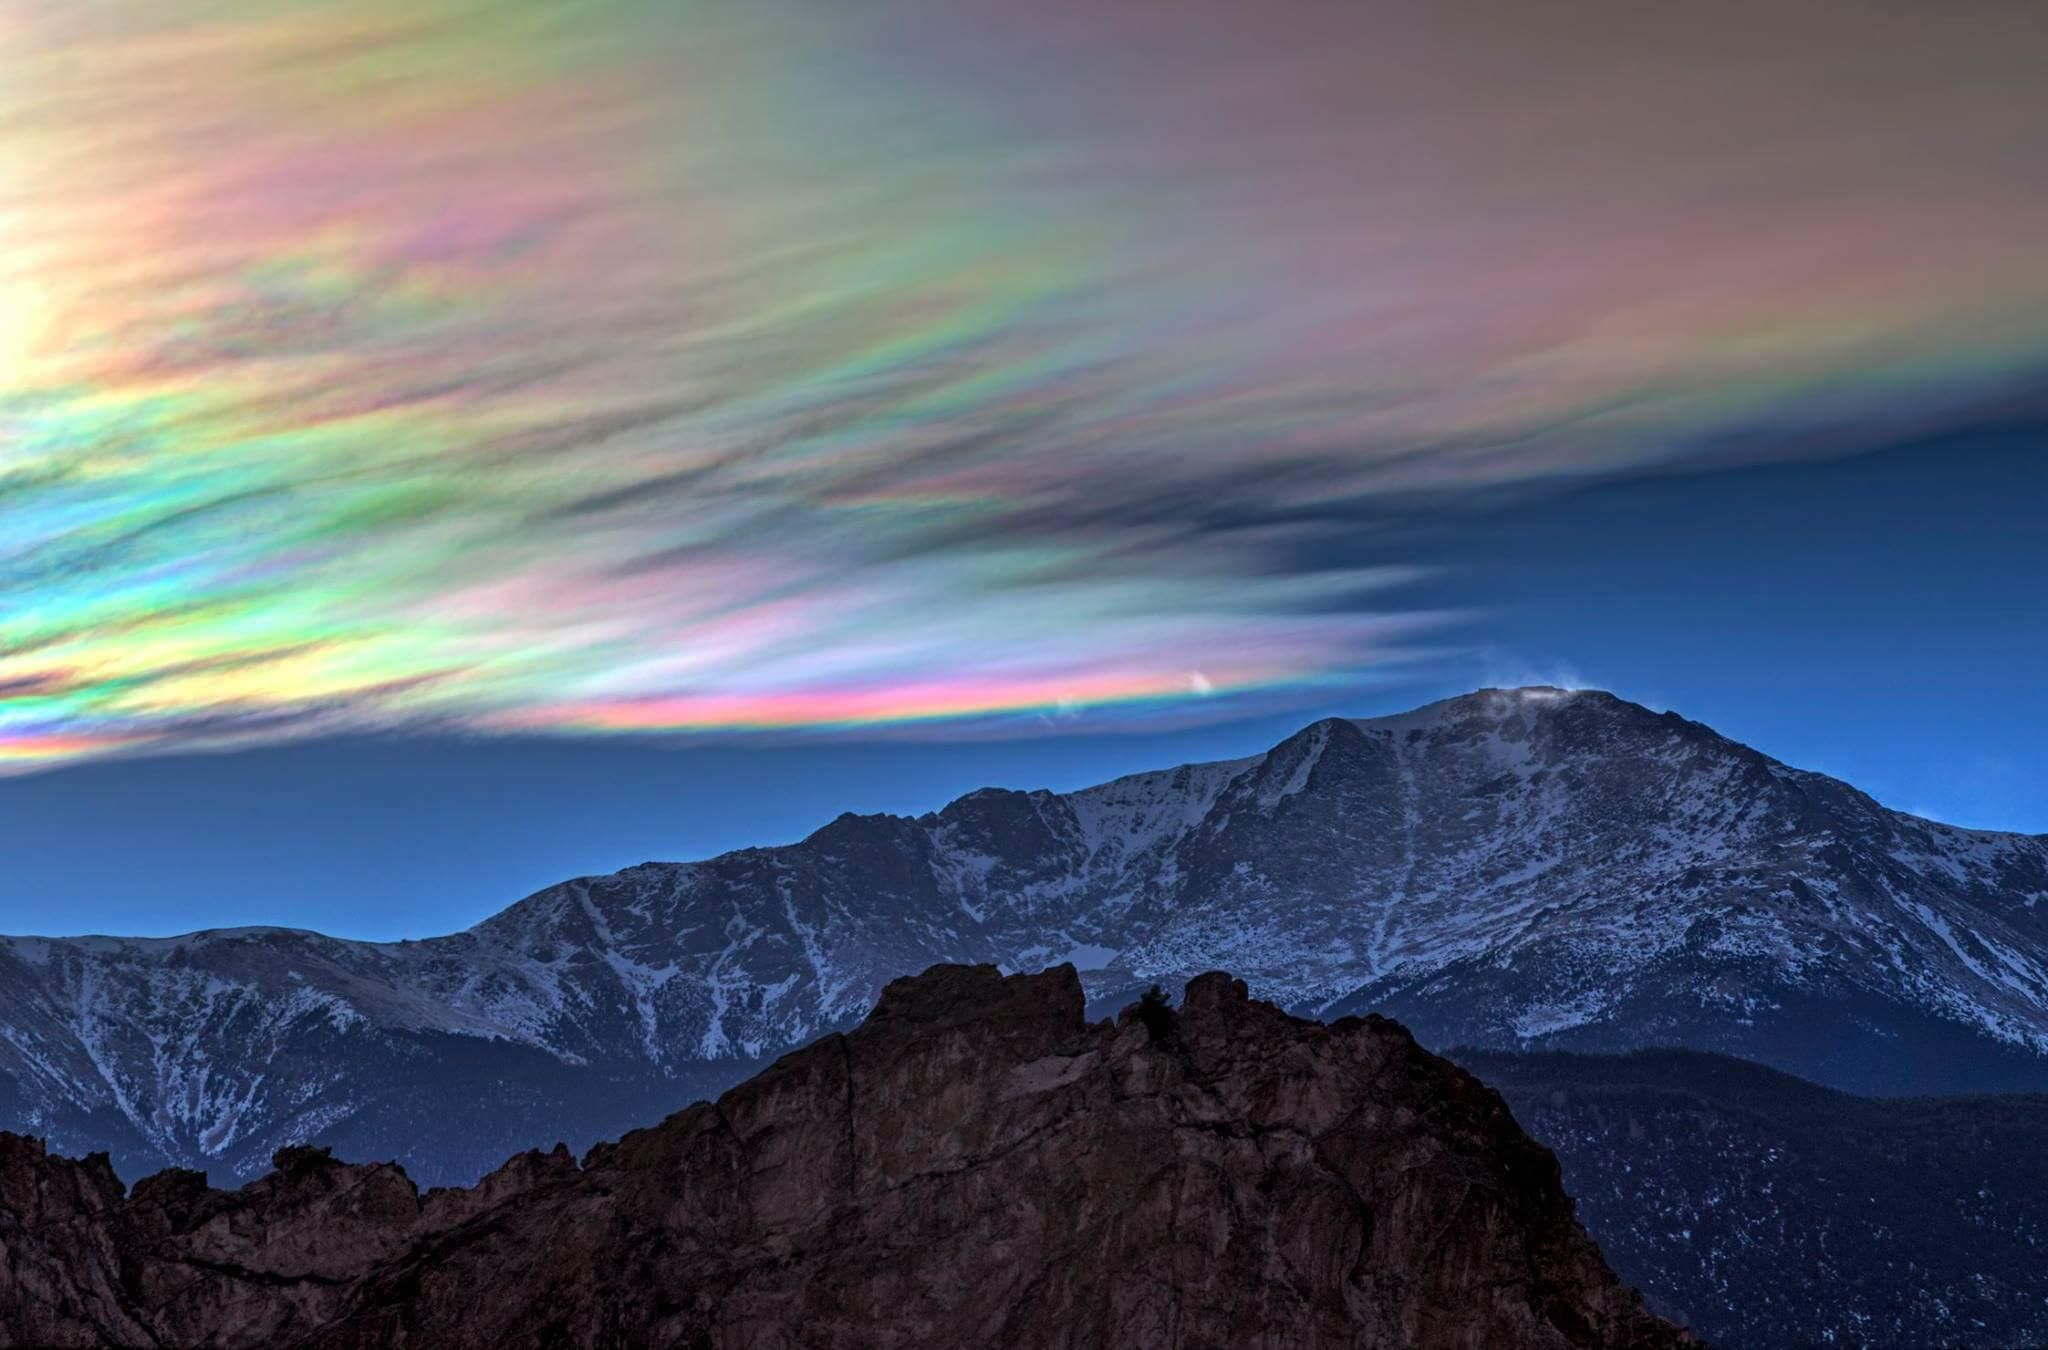 2048x1350 Iridescent Clouds over Pikes Peak [2048 x 1350] | Pikes peak, Earth photos, Nature photos